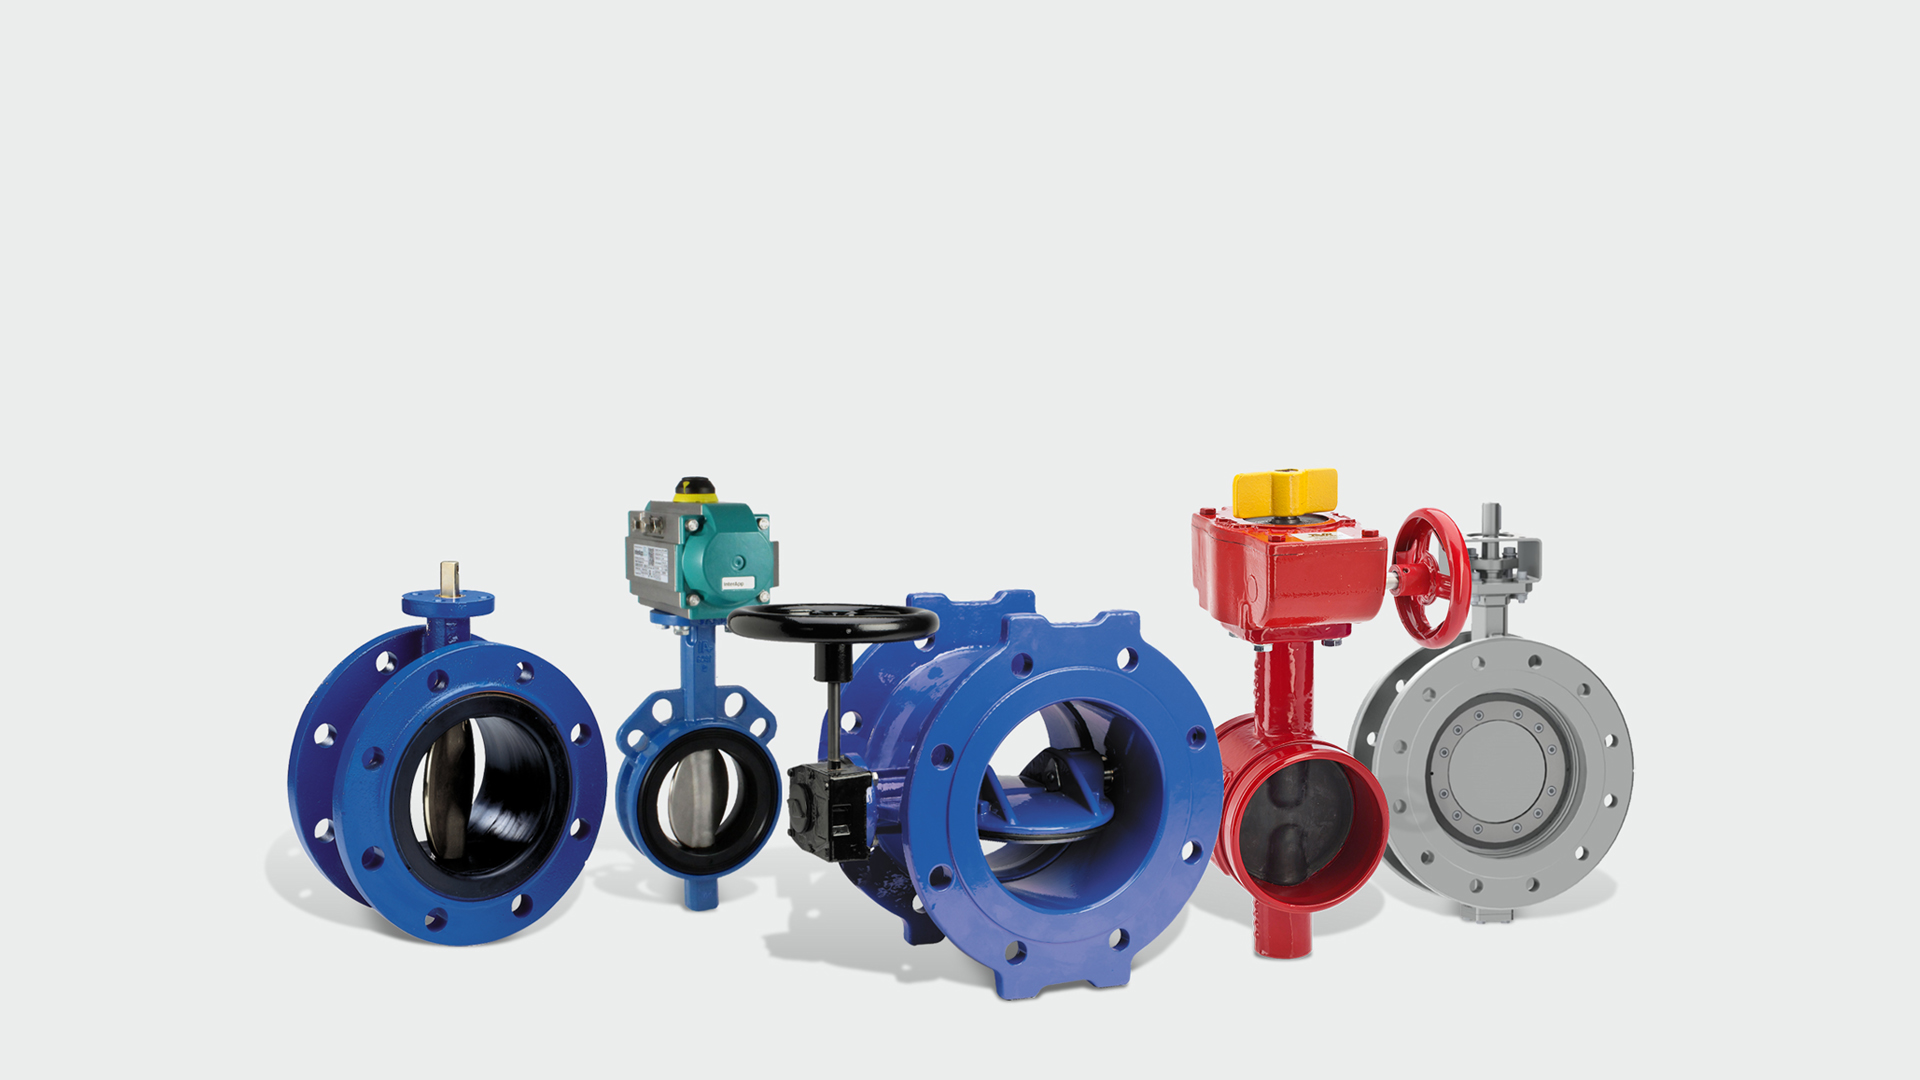 Visit our insights section to learn about AVK butterfly valves